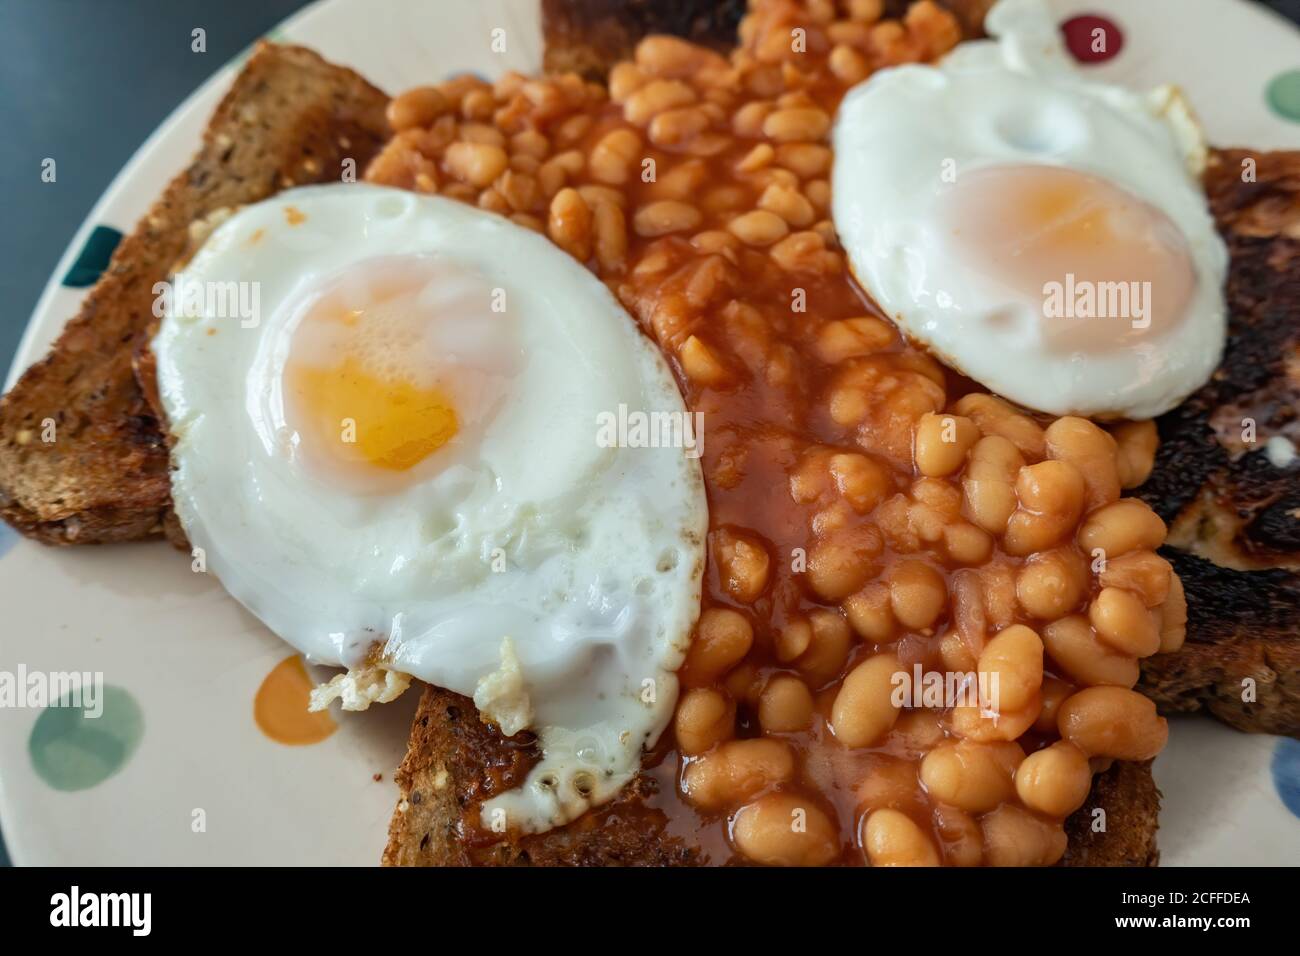 2 Fried eggs with baked beans on brown bread toast snack Stock Photo